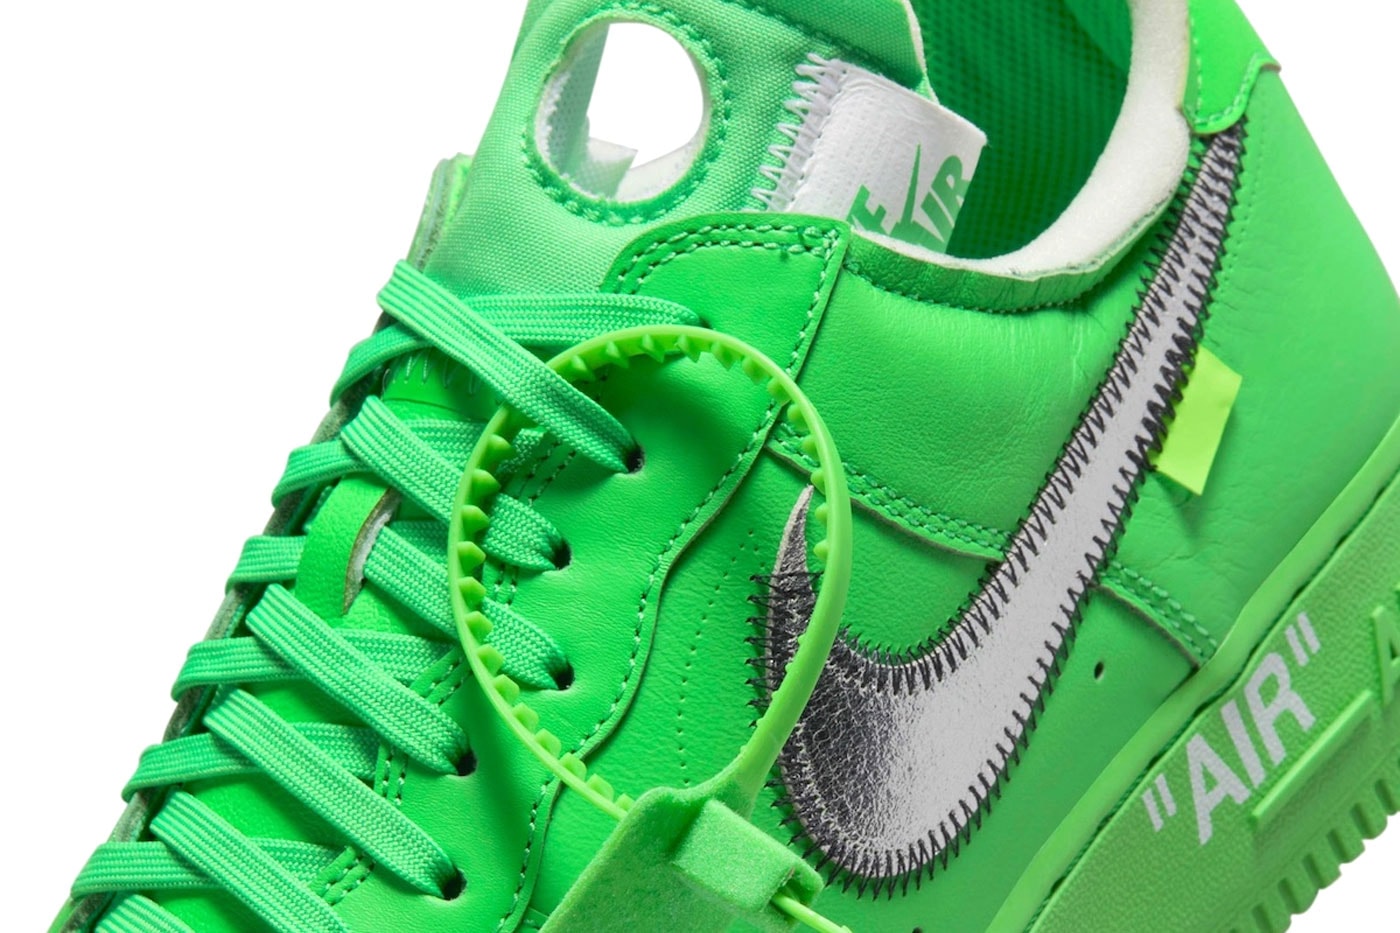 Off-White™ Nike Air Force 1 Low Light Green Spark Official Look Release Info DX1419-300 Date Buy Price 